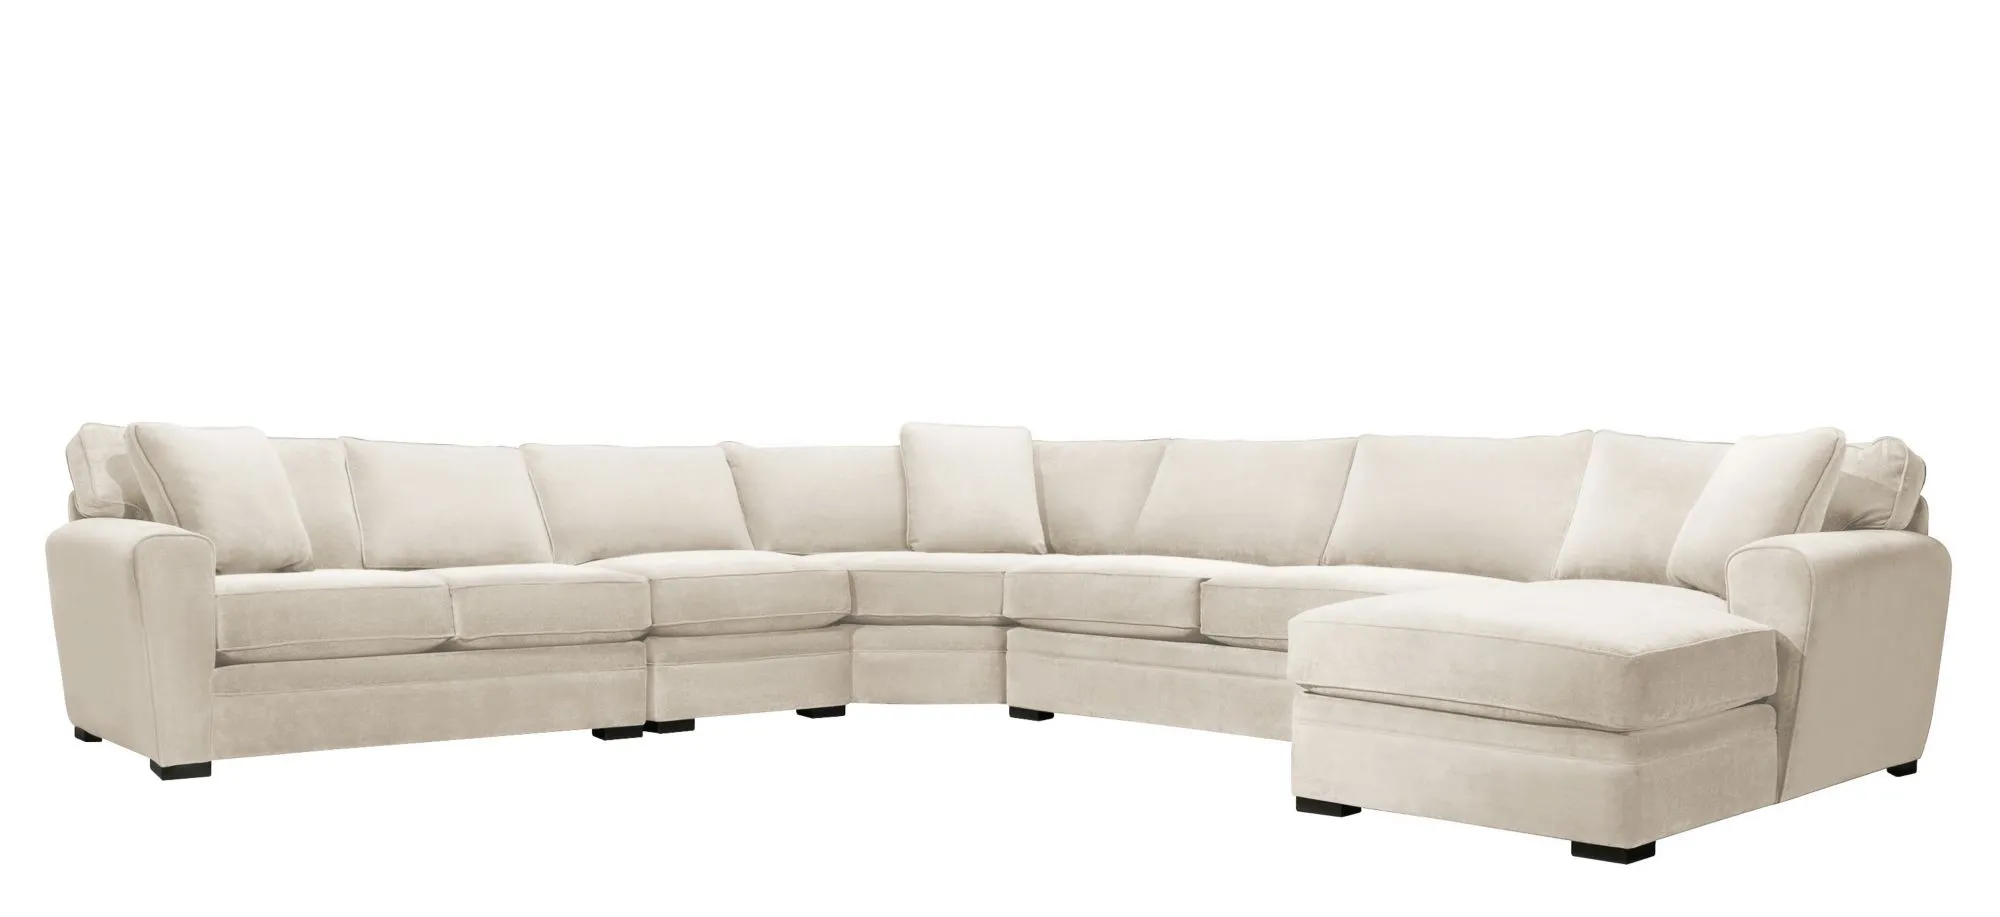 Artemis II 5-pc. Right Hand Facing Sectional Sofa in Gypsy Cream by Jonathan Louis